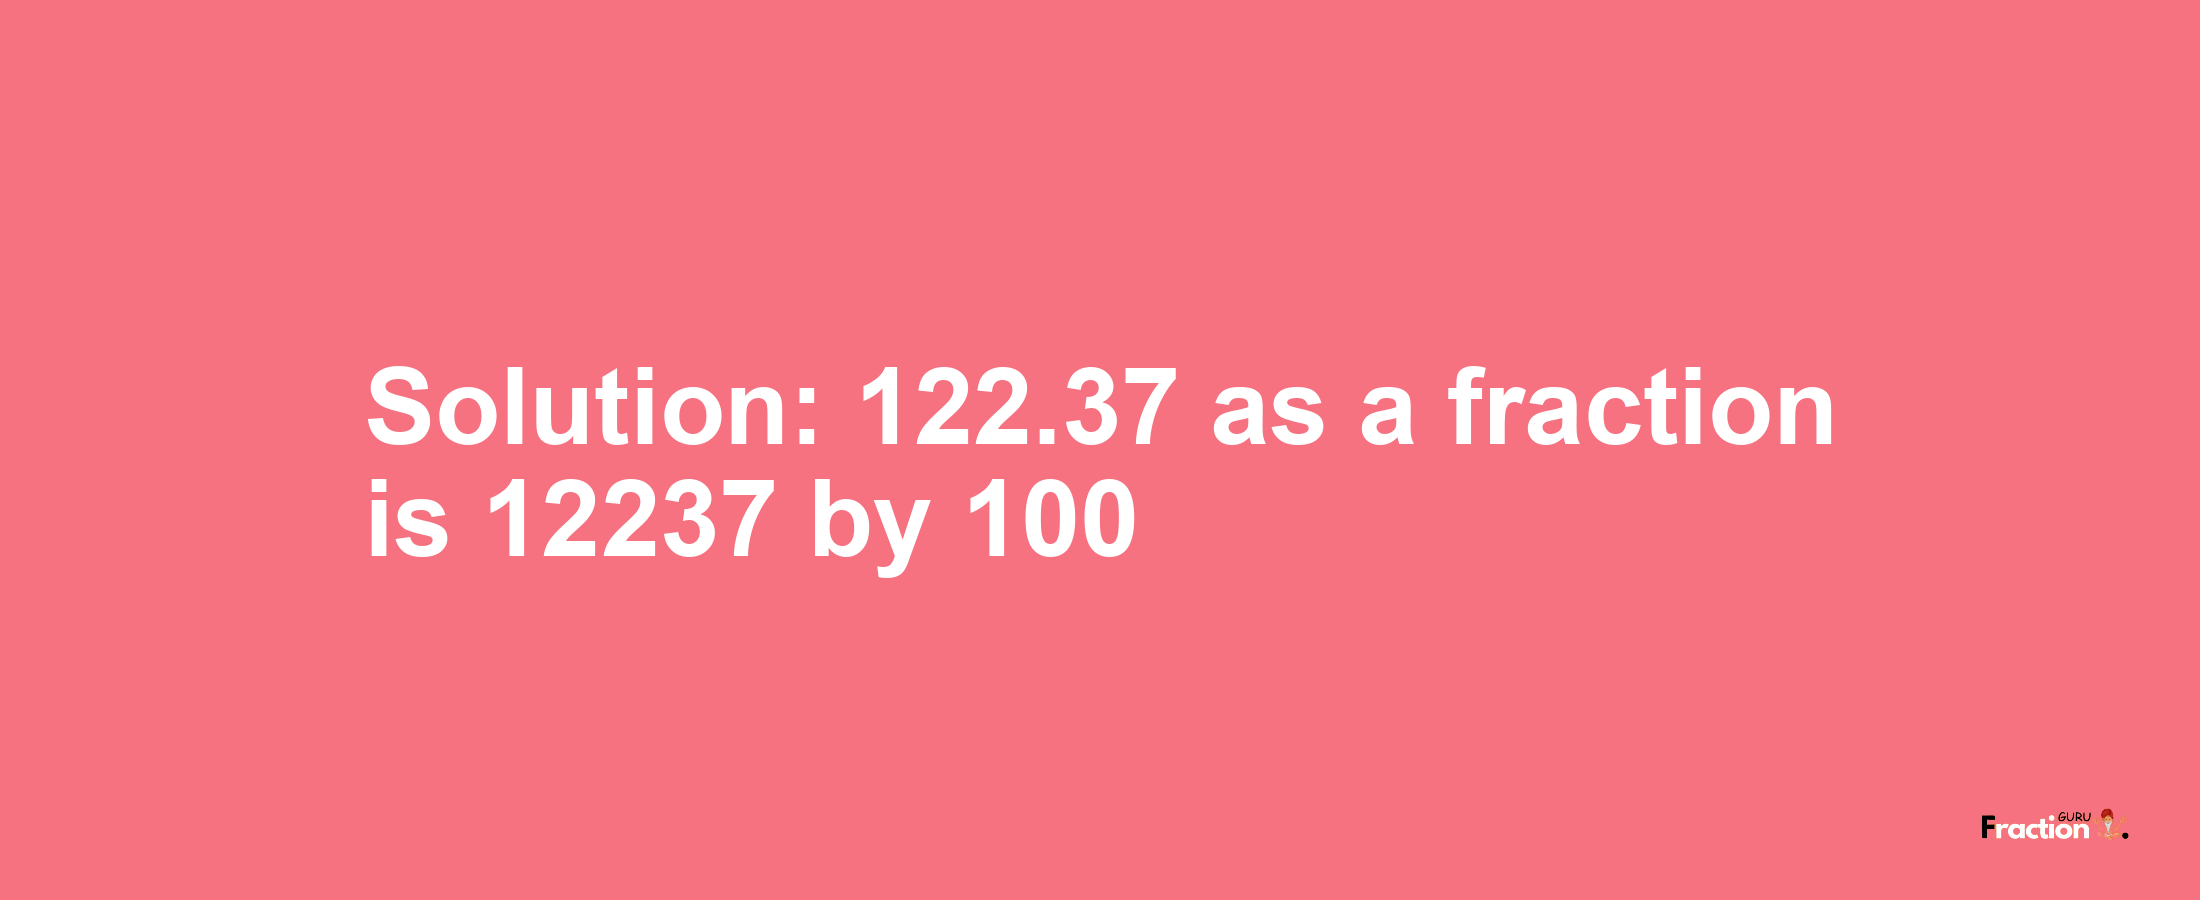 Solution:122.37 as a fraction is 12237/100